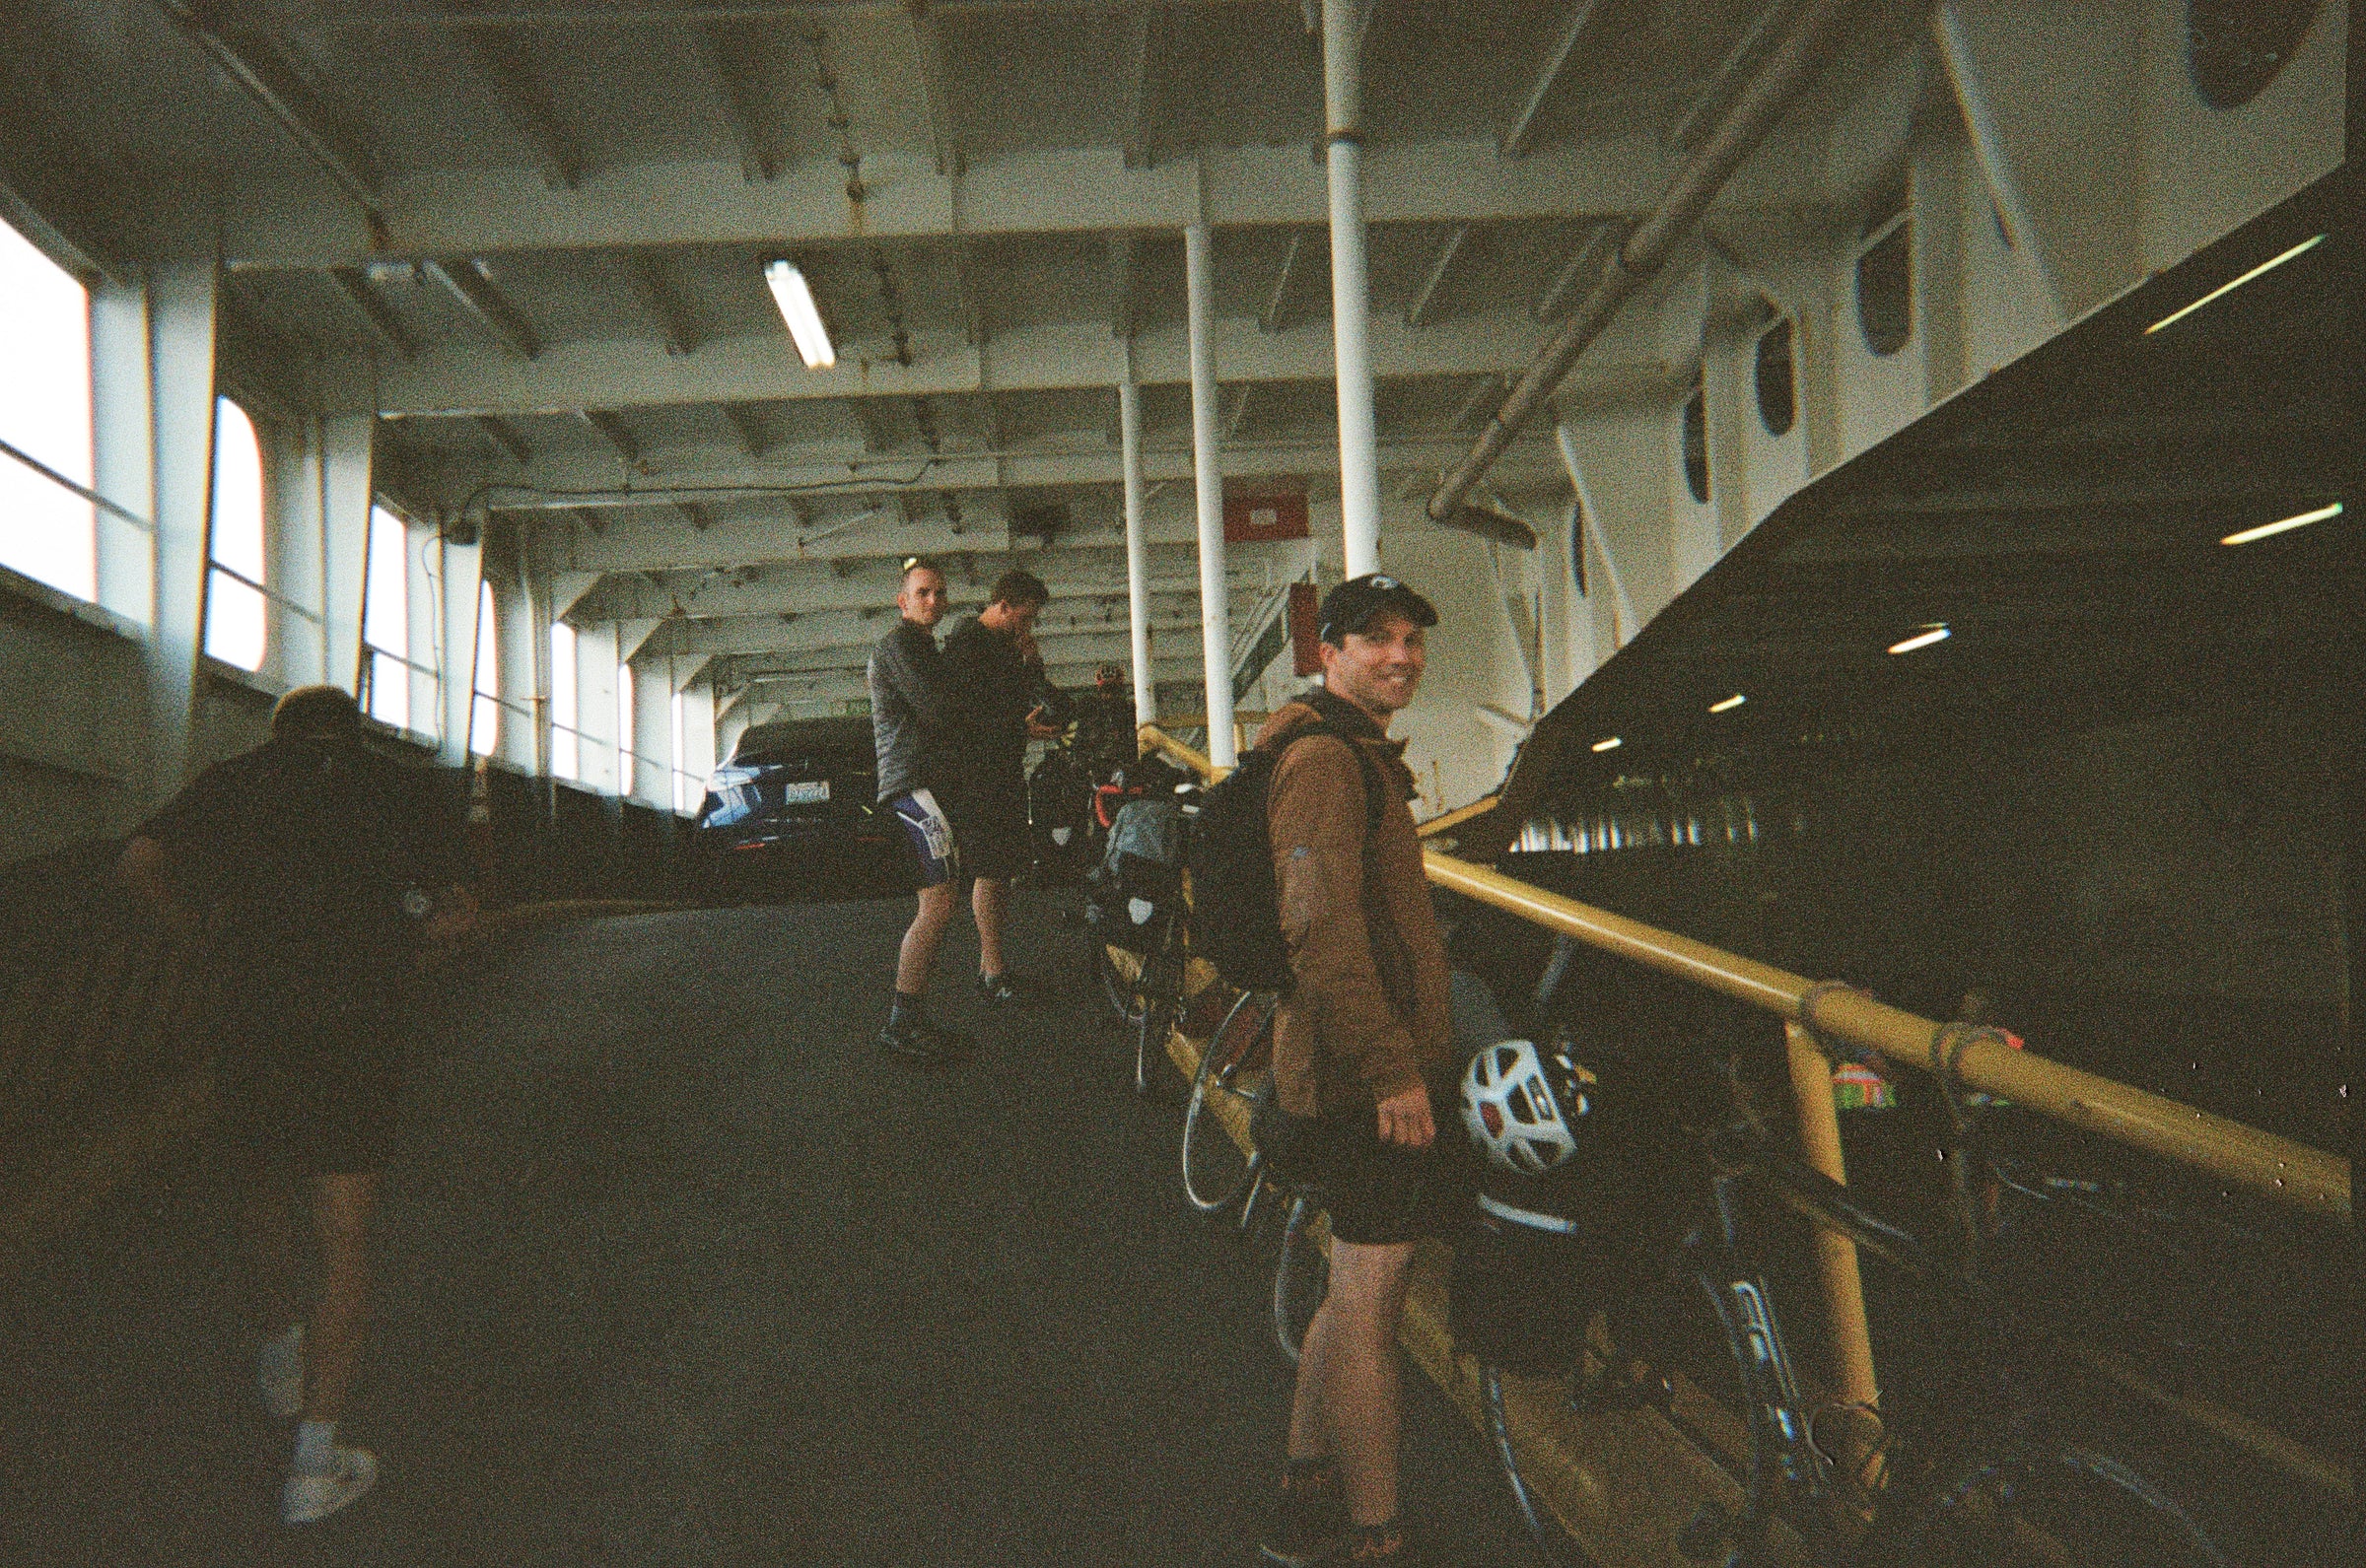 securing our bikes on the car deck of the ferry